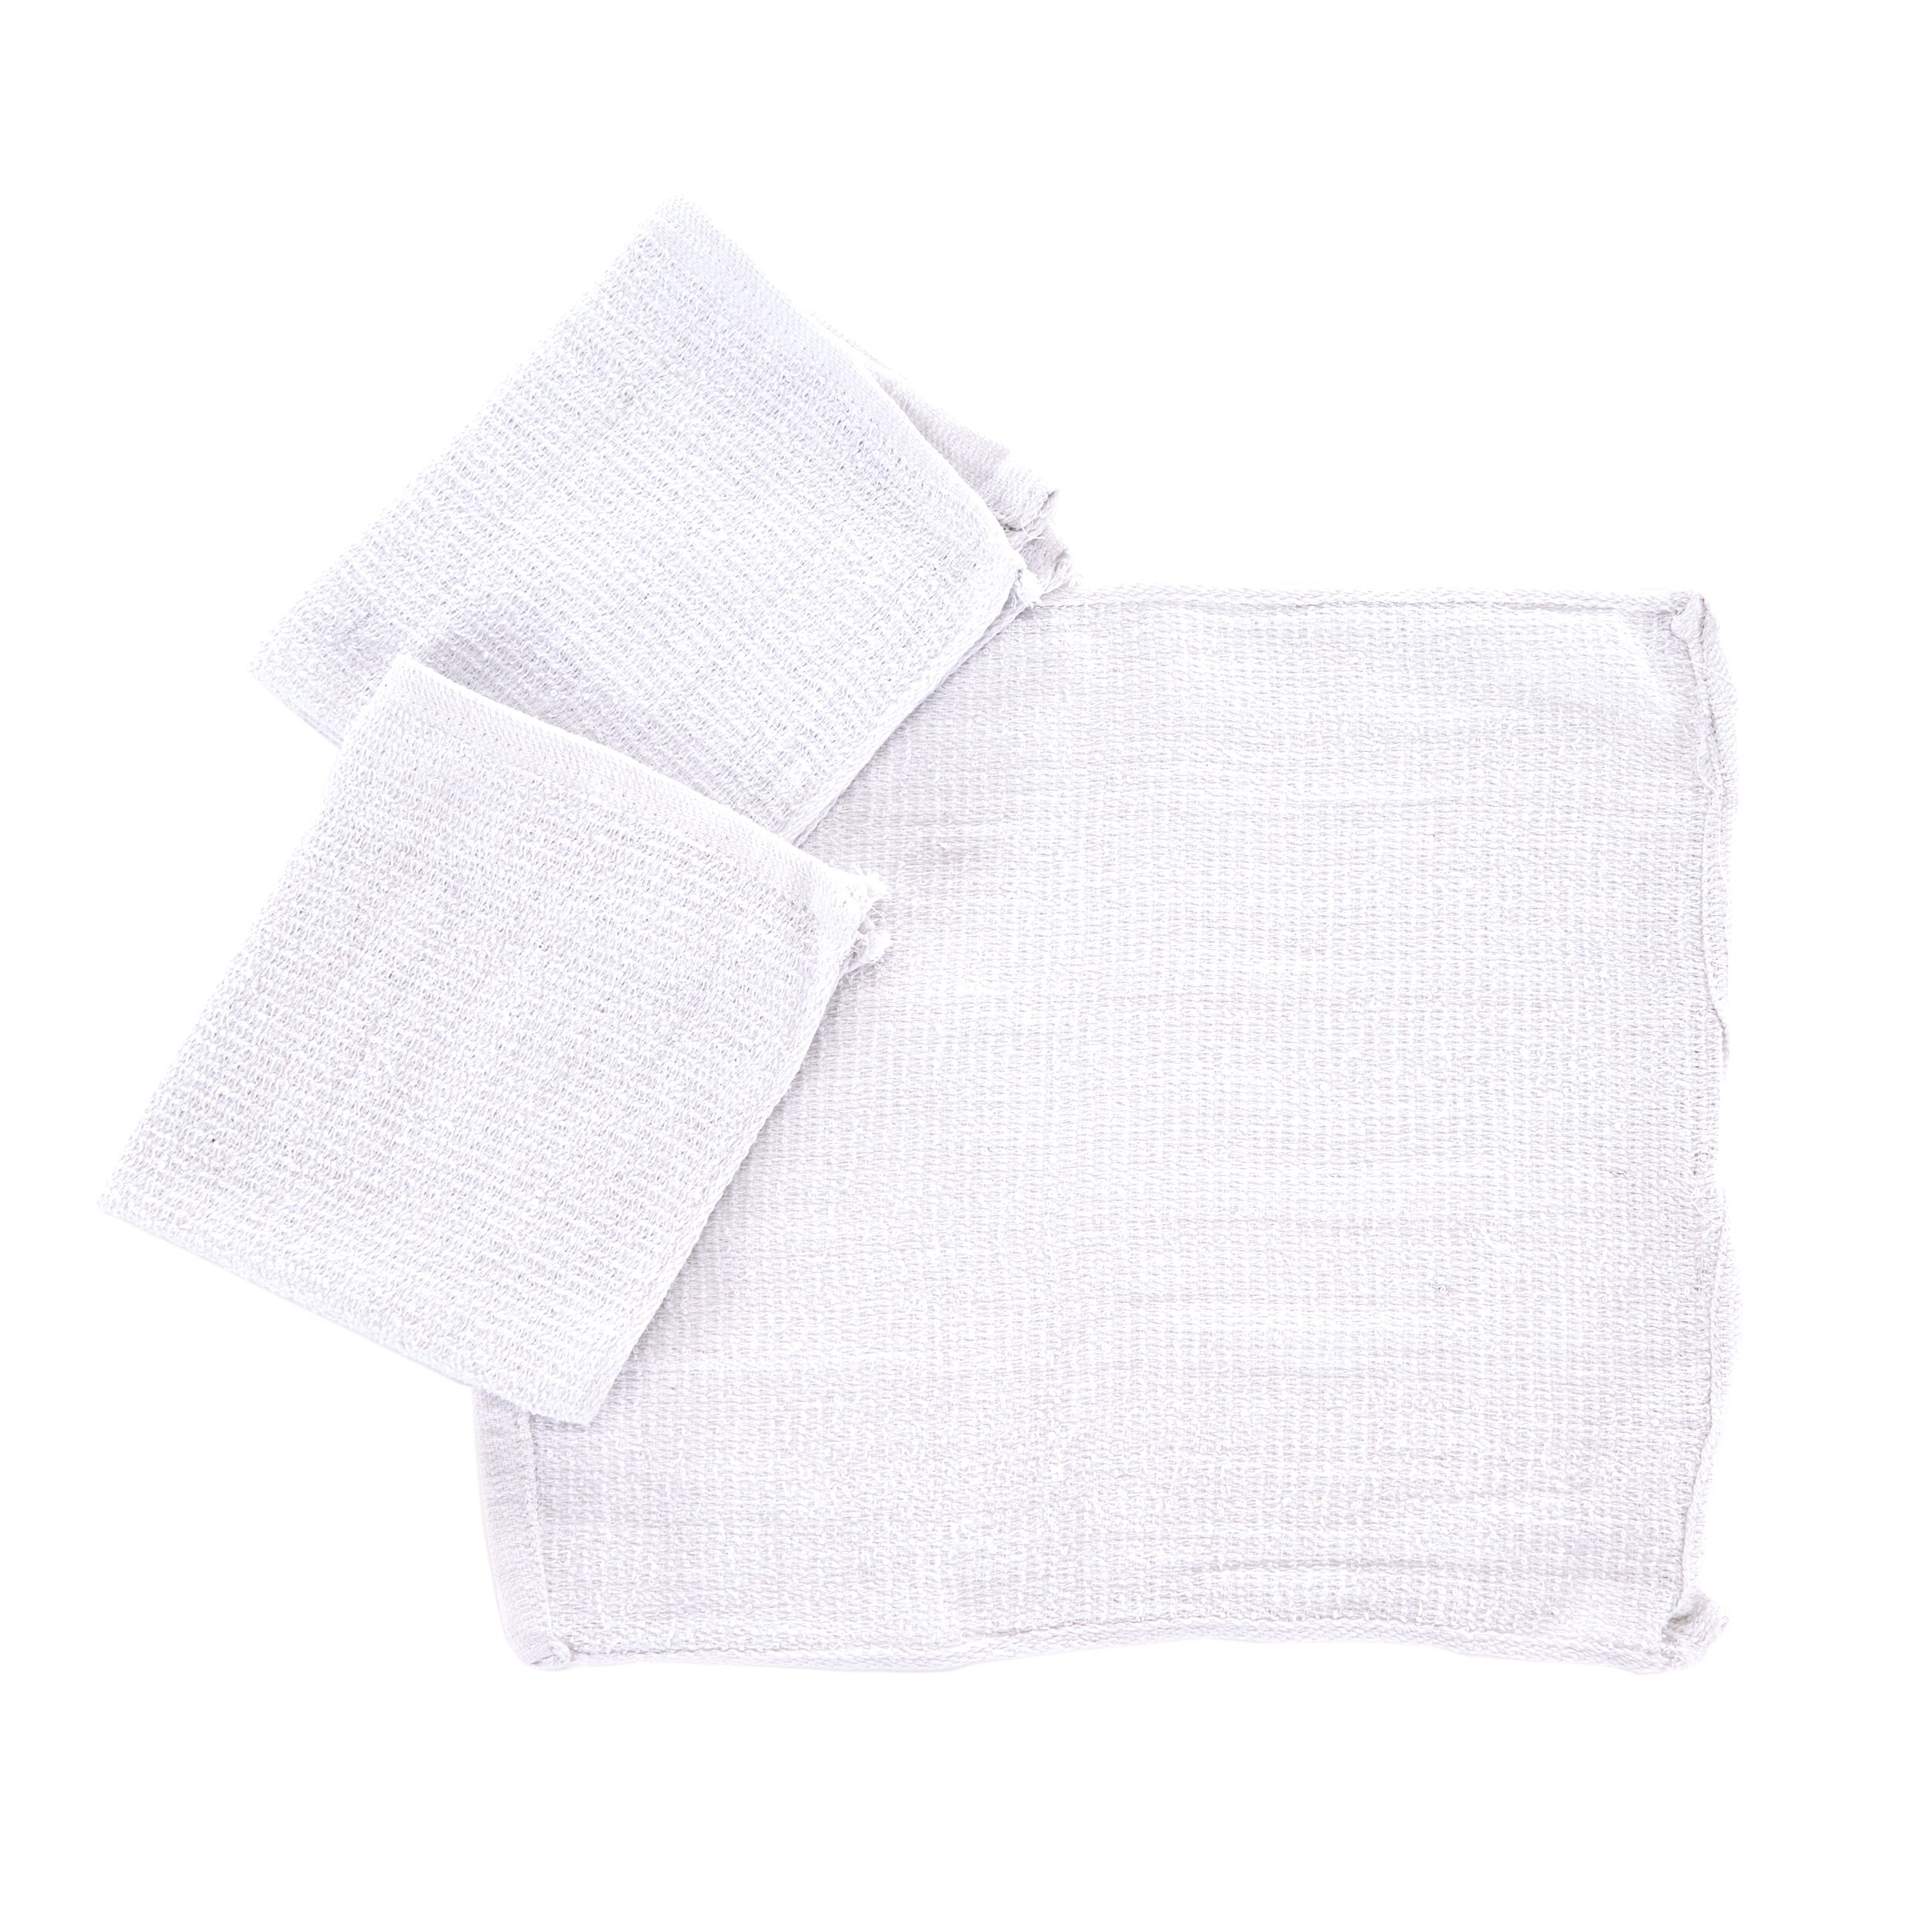 Wholesale Cotton Terry Towels 15x25 Lightweight White